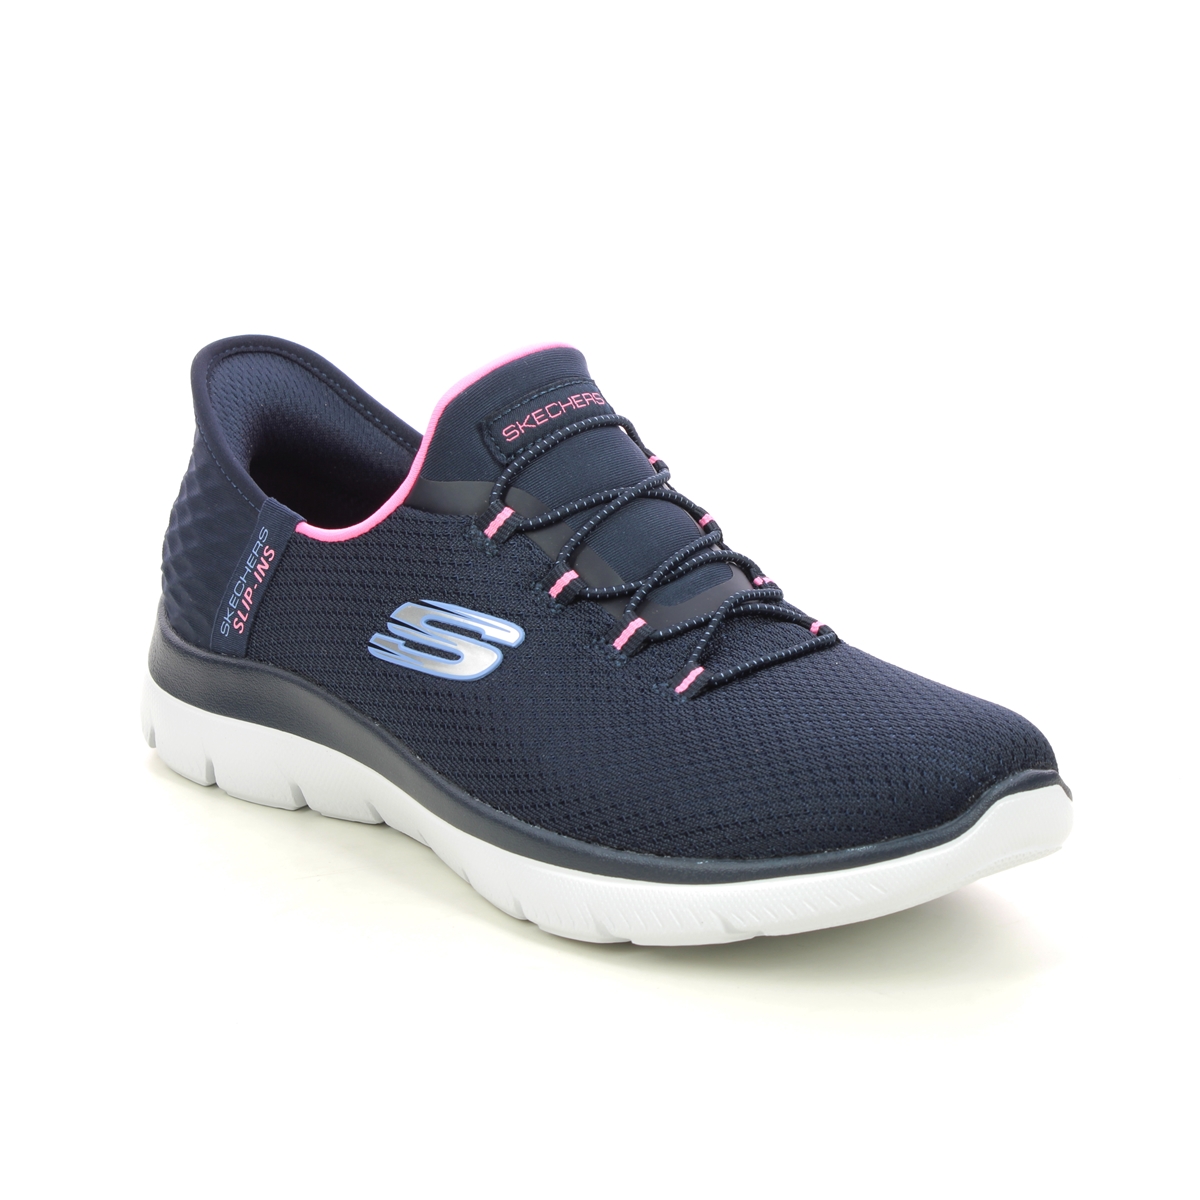 Skechers Slip Ins Summit NVPK Navy Pink Womens trainers 150123 in a Plain Textile in Size 4